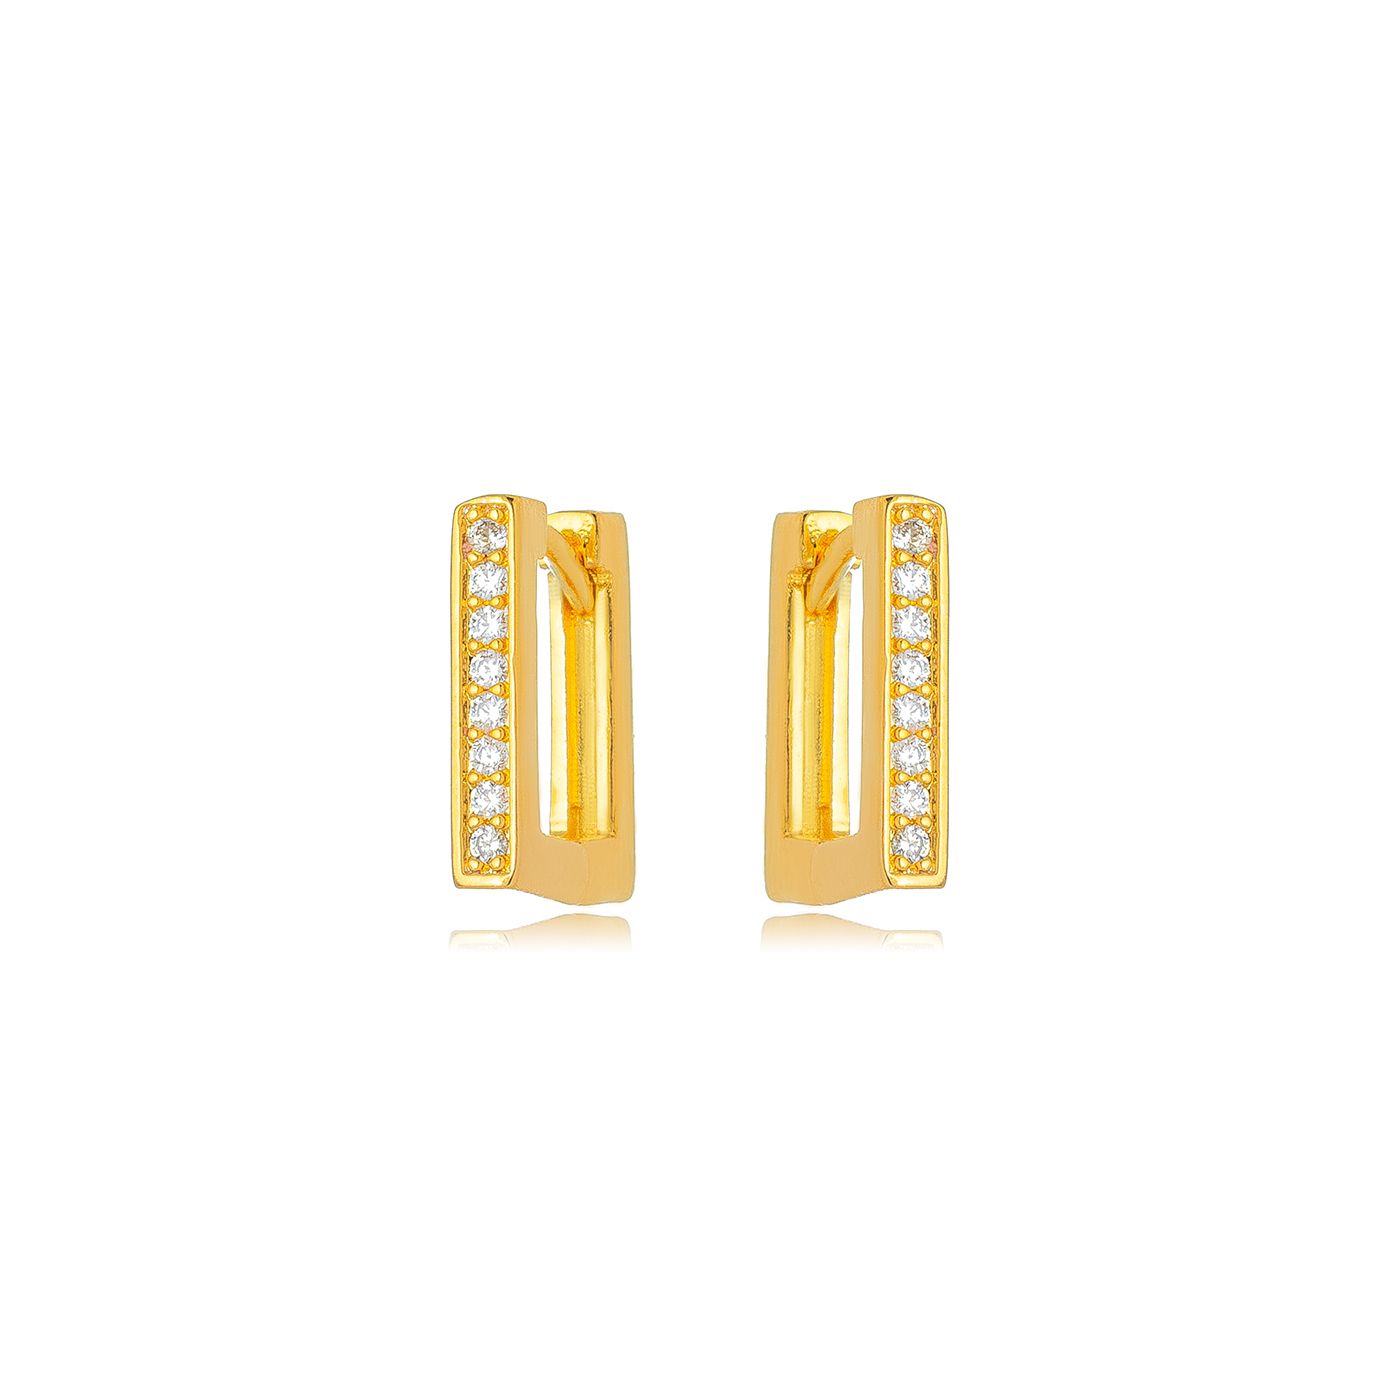 Square earring with zirconia